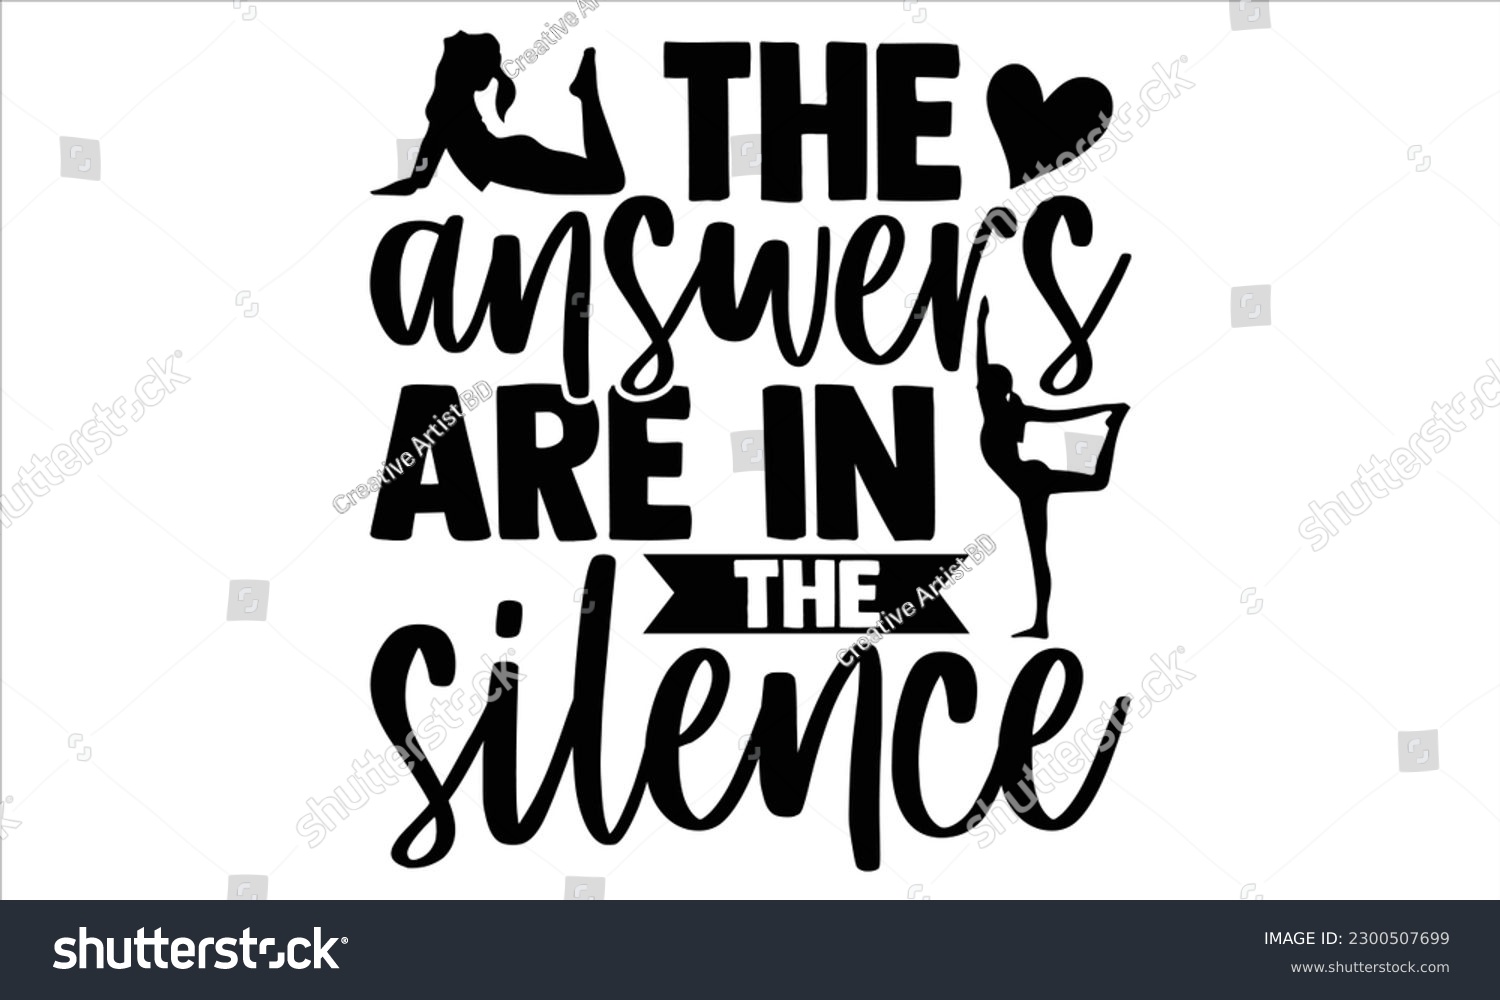 SVG of The answers are in the silence   - Yoga Day SVG Design, Hand lettering inspirational quotes isolated on white background, used for prints on bags, poster, banner, flyer and mug, pillows. svg